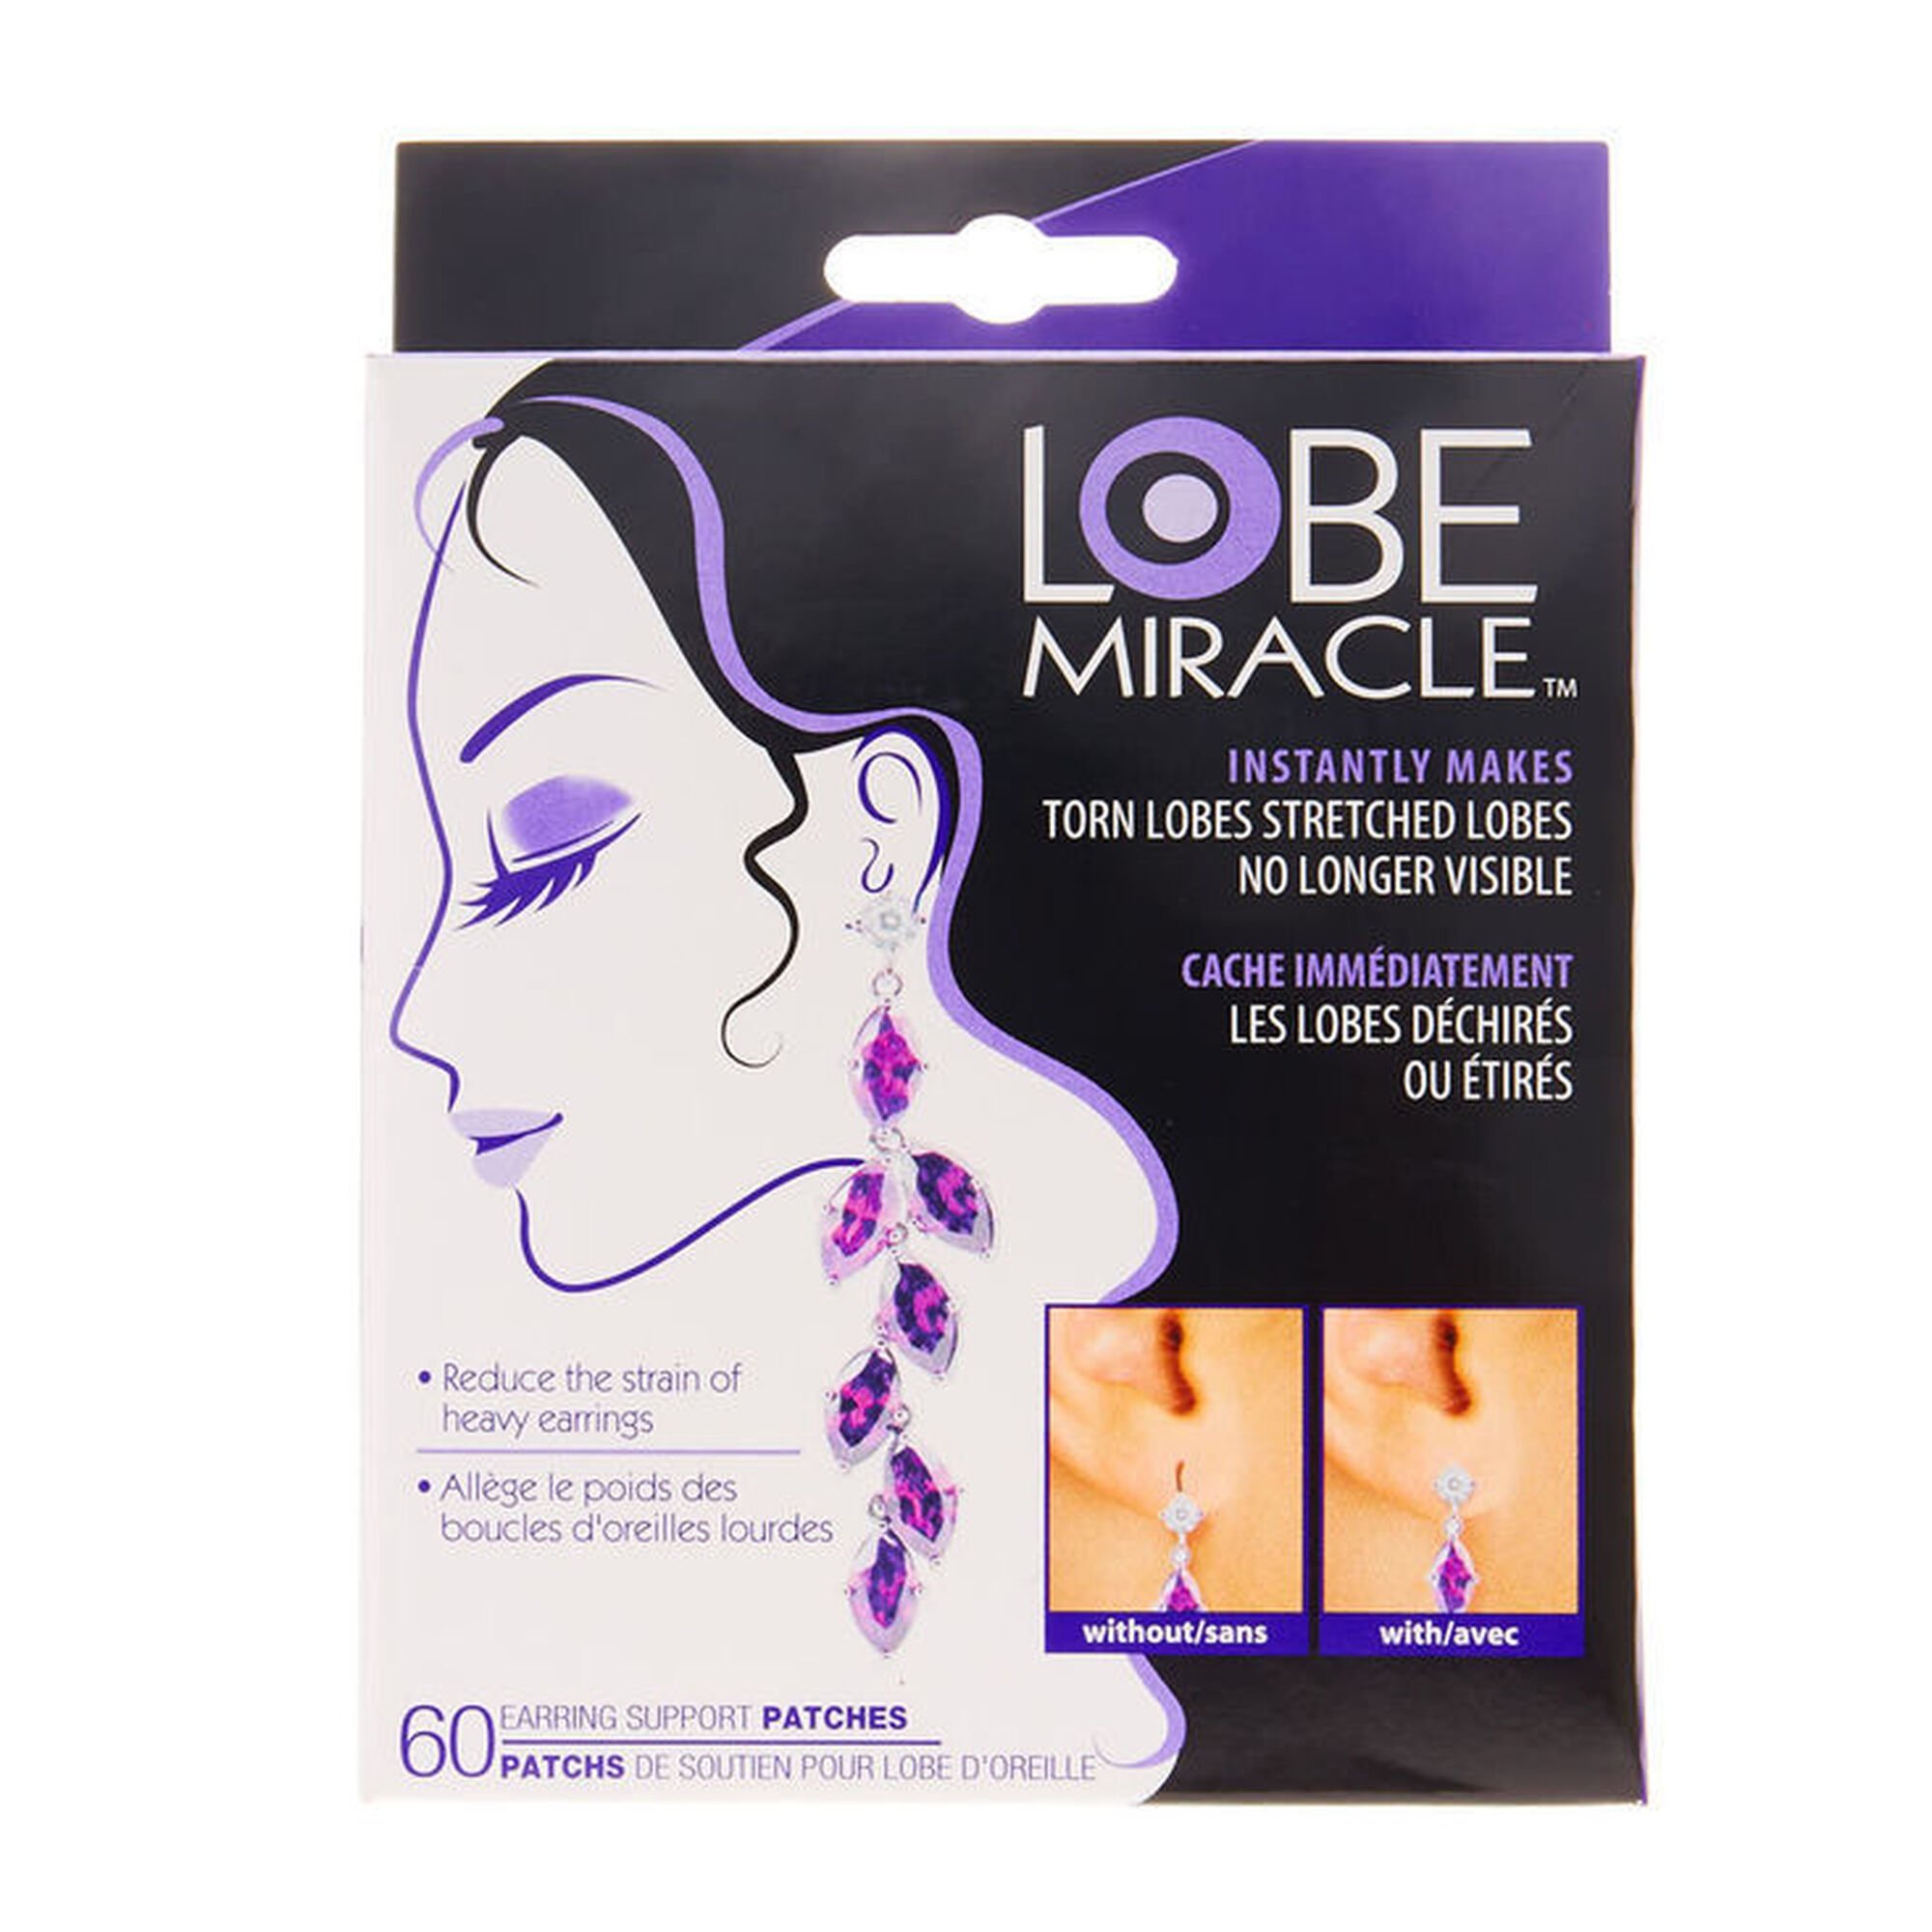 View Claires Lobe Wonder Earring Support Patches information